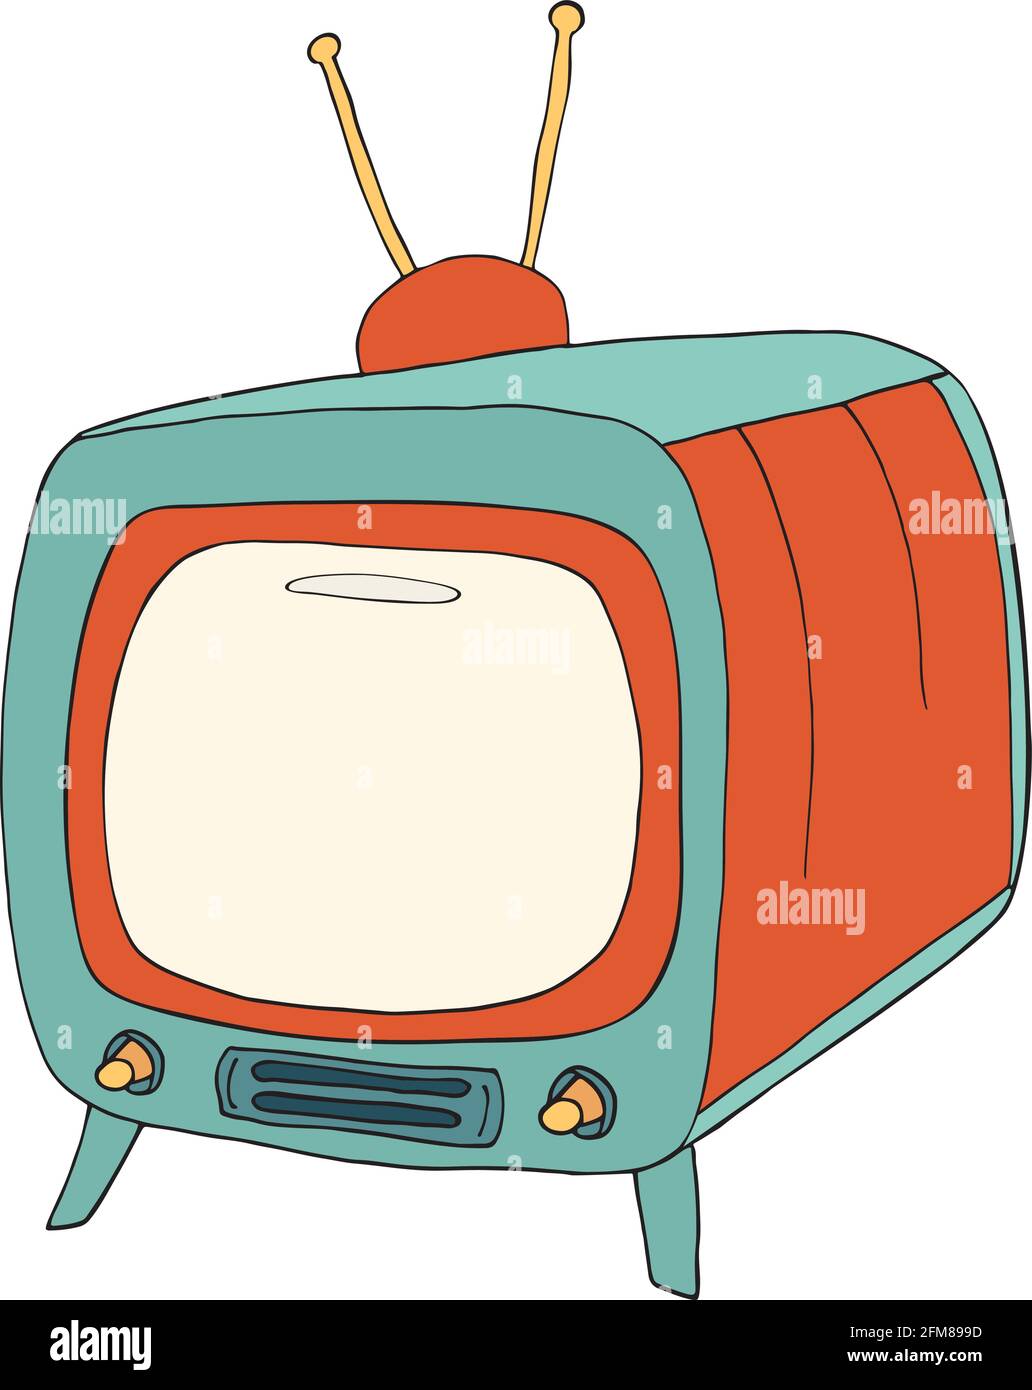 Blank TV display illustration in retro vintage style. Broadcasting or communication concept. Old isolated television with antenna. Hand draw comic Stock Vector